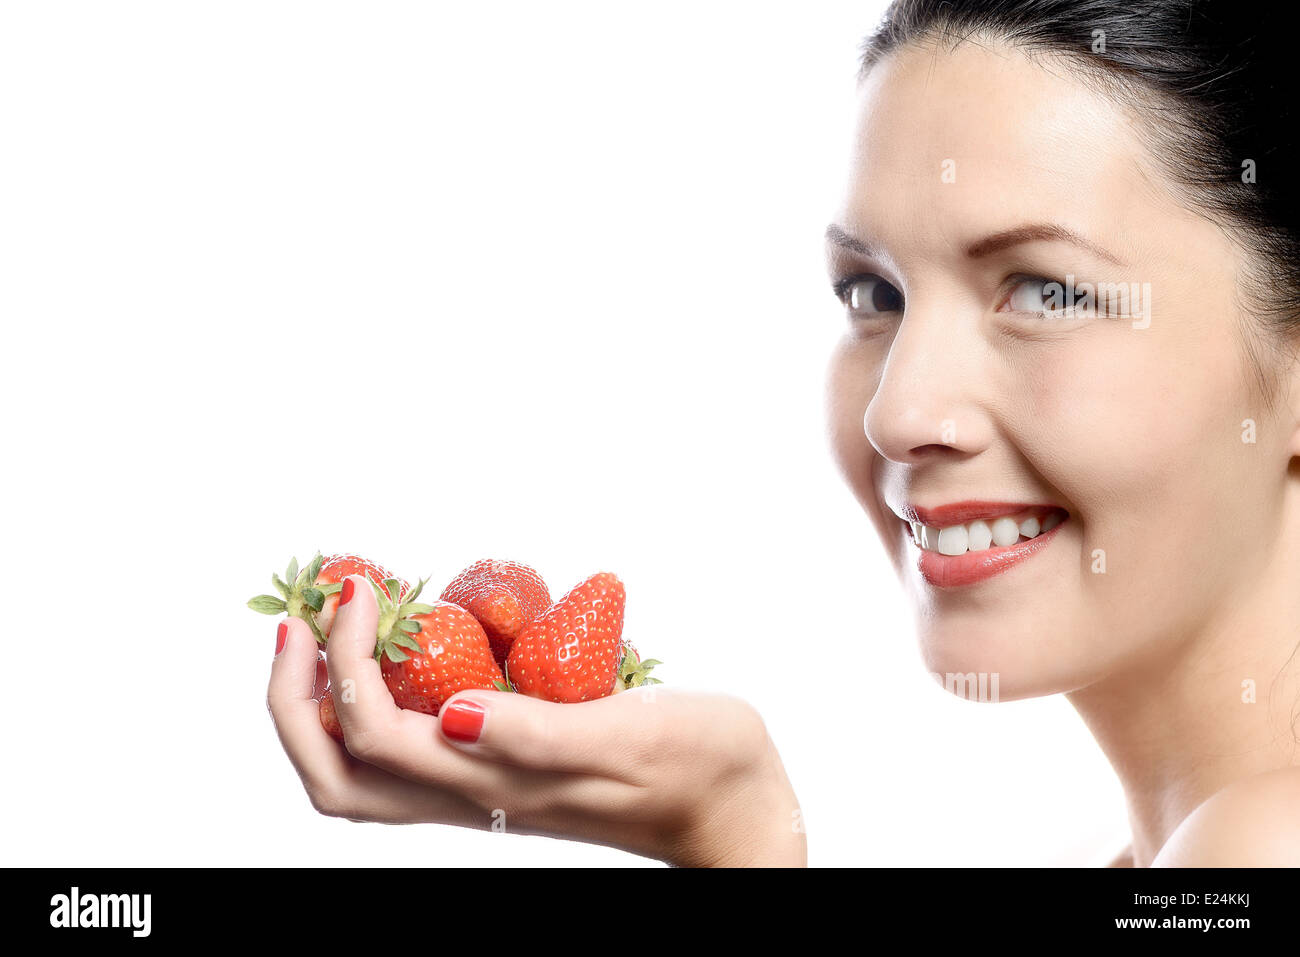 Smiling Woman with Strawberries in her Hand on white background. Stock Photo